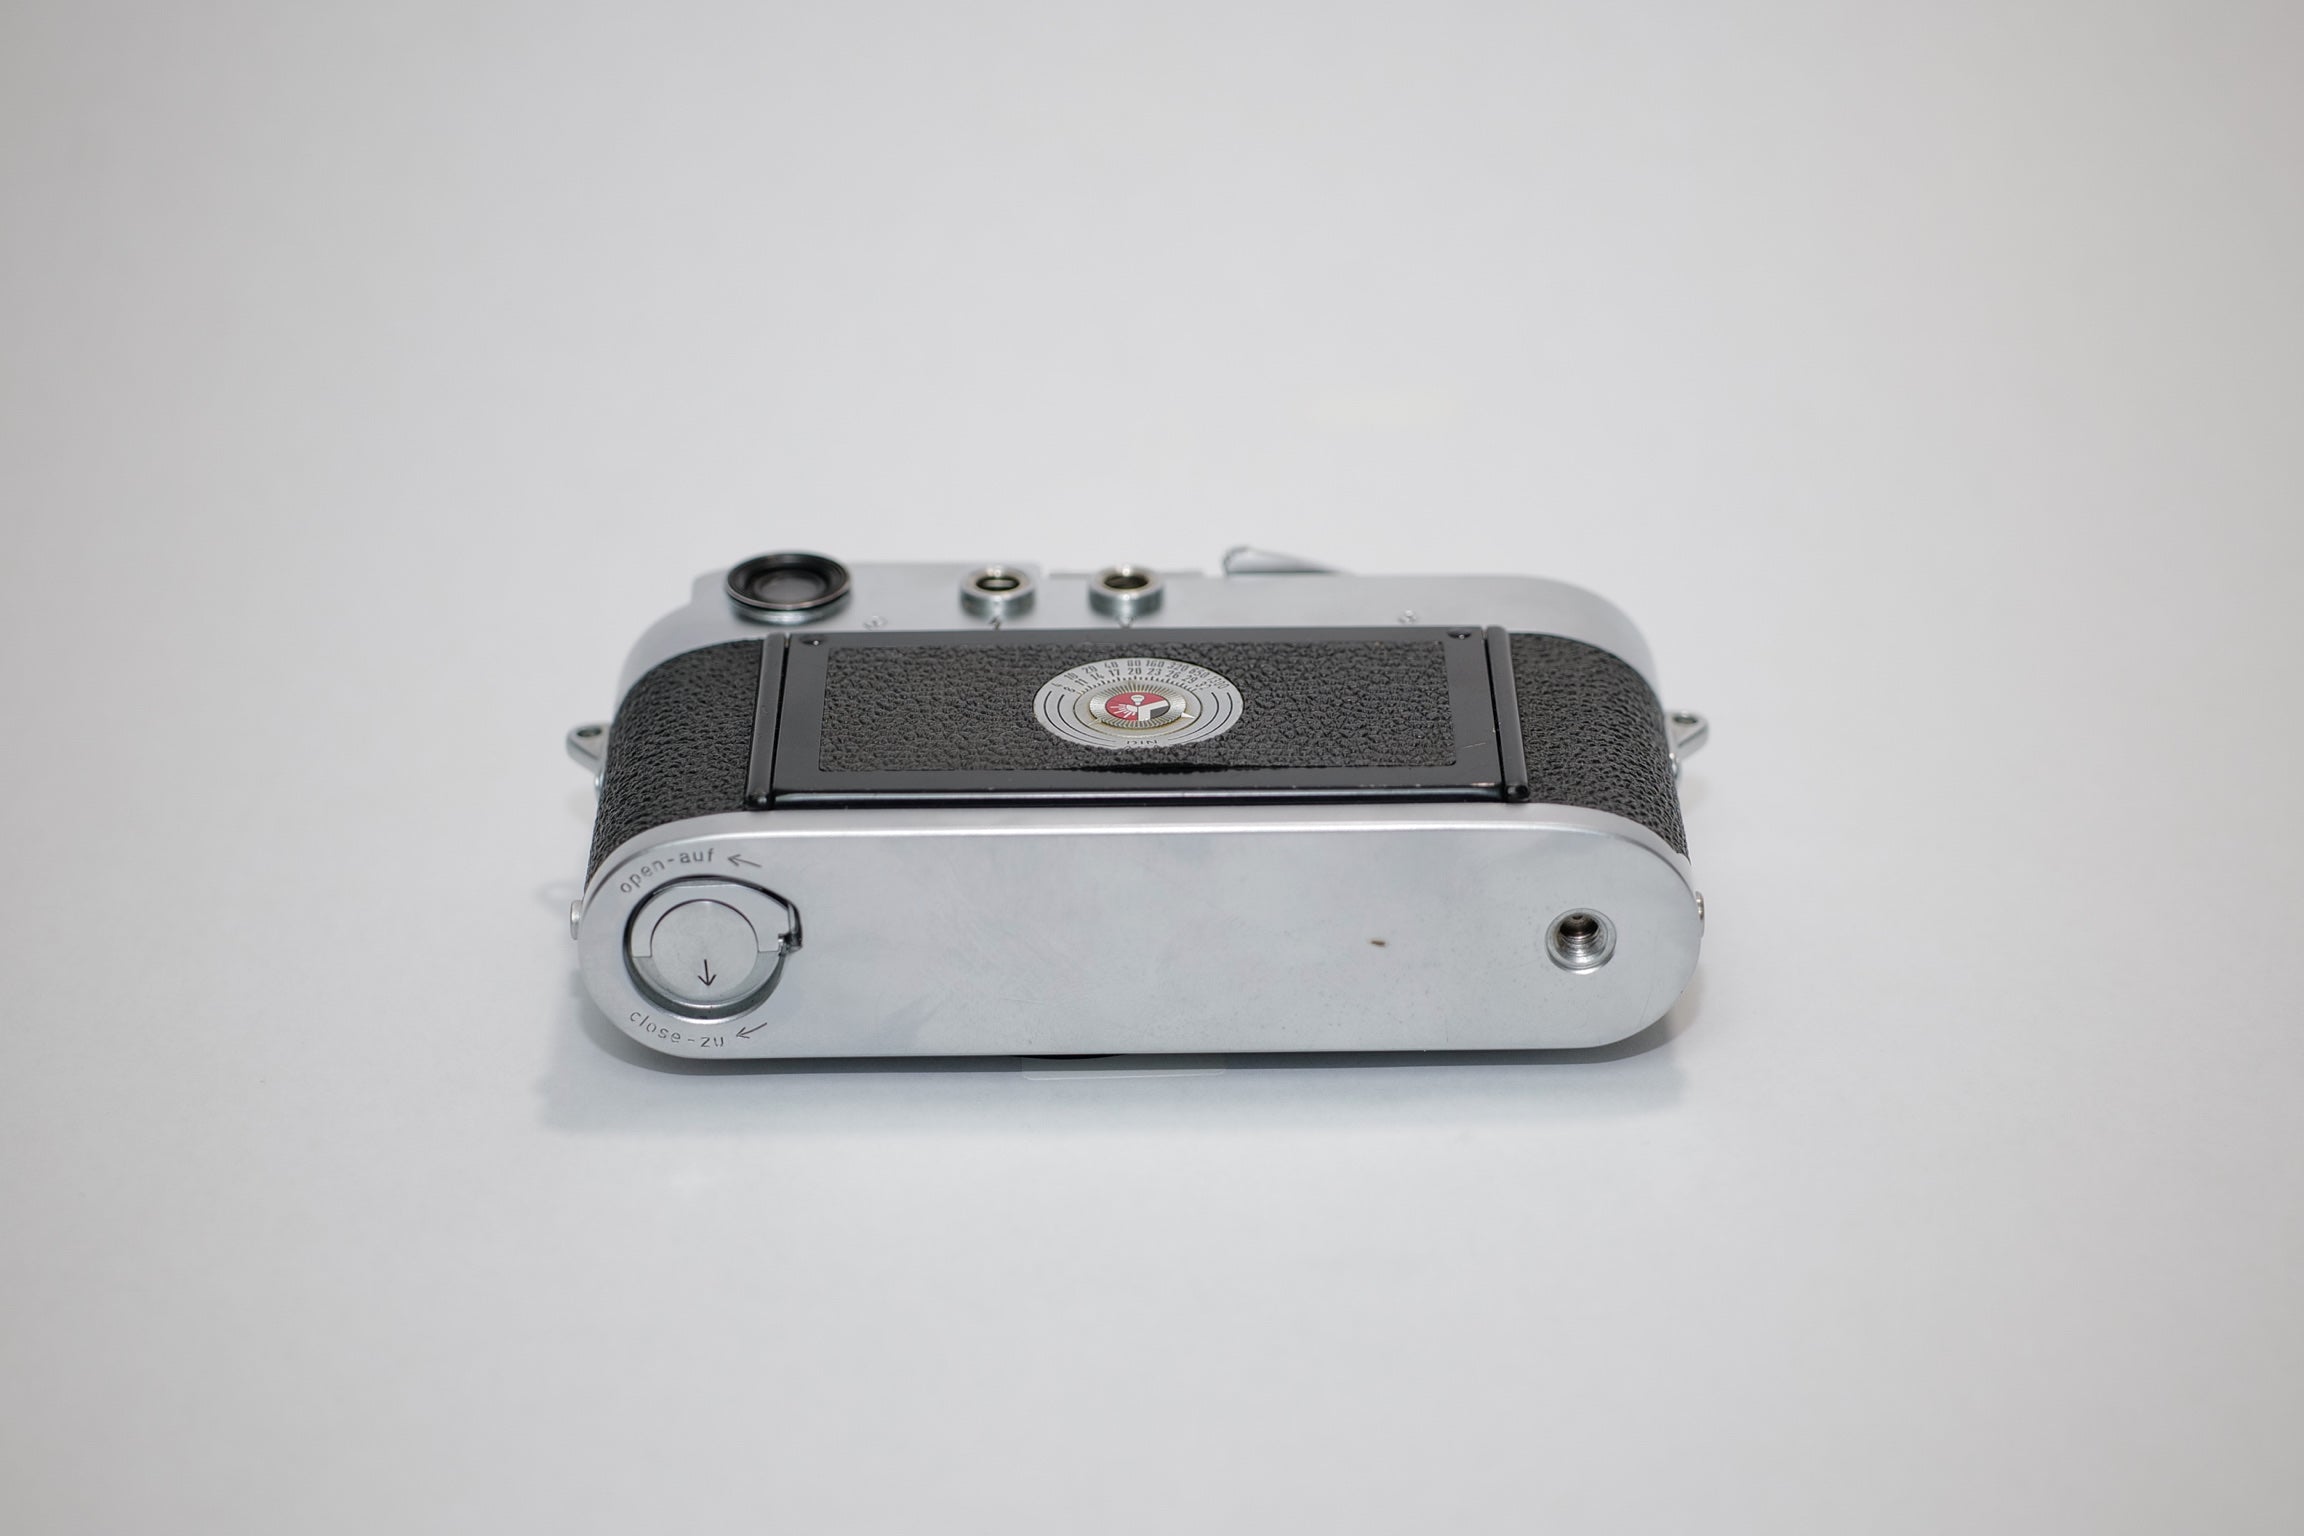 Pre-Owned Leica M3 DS Camera